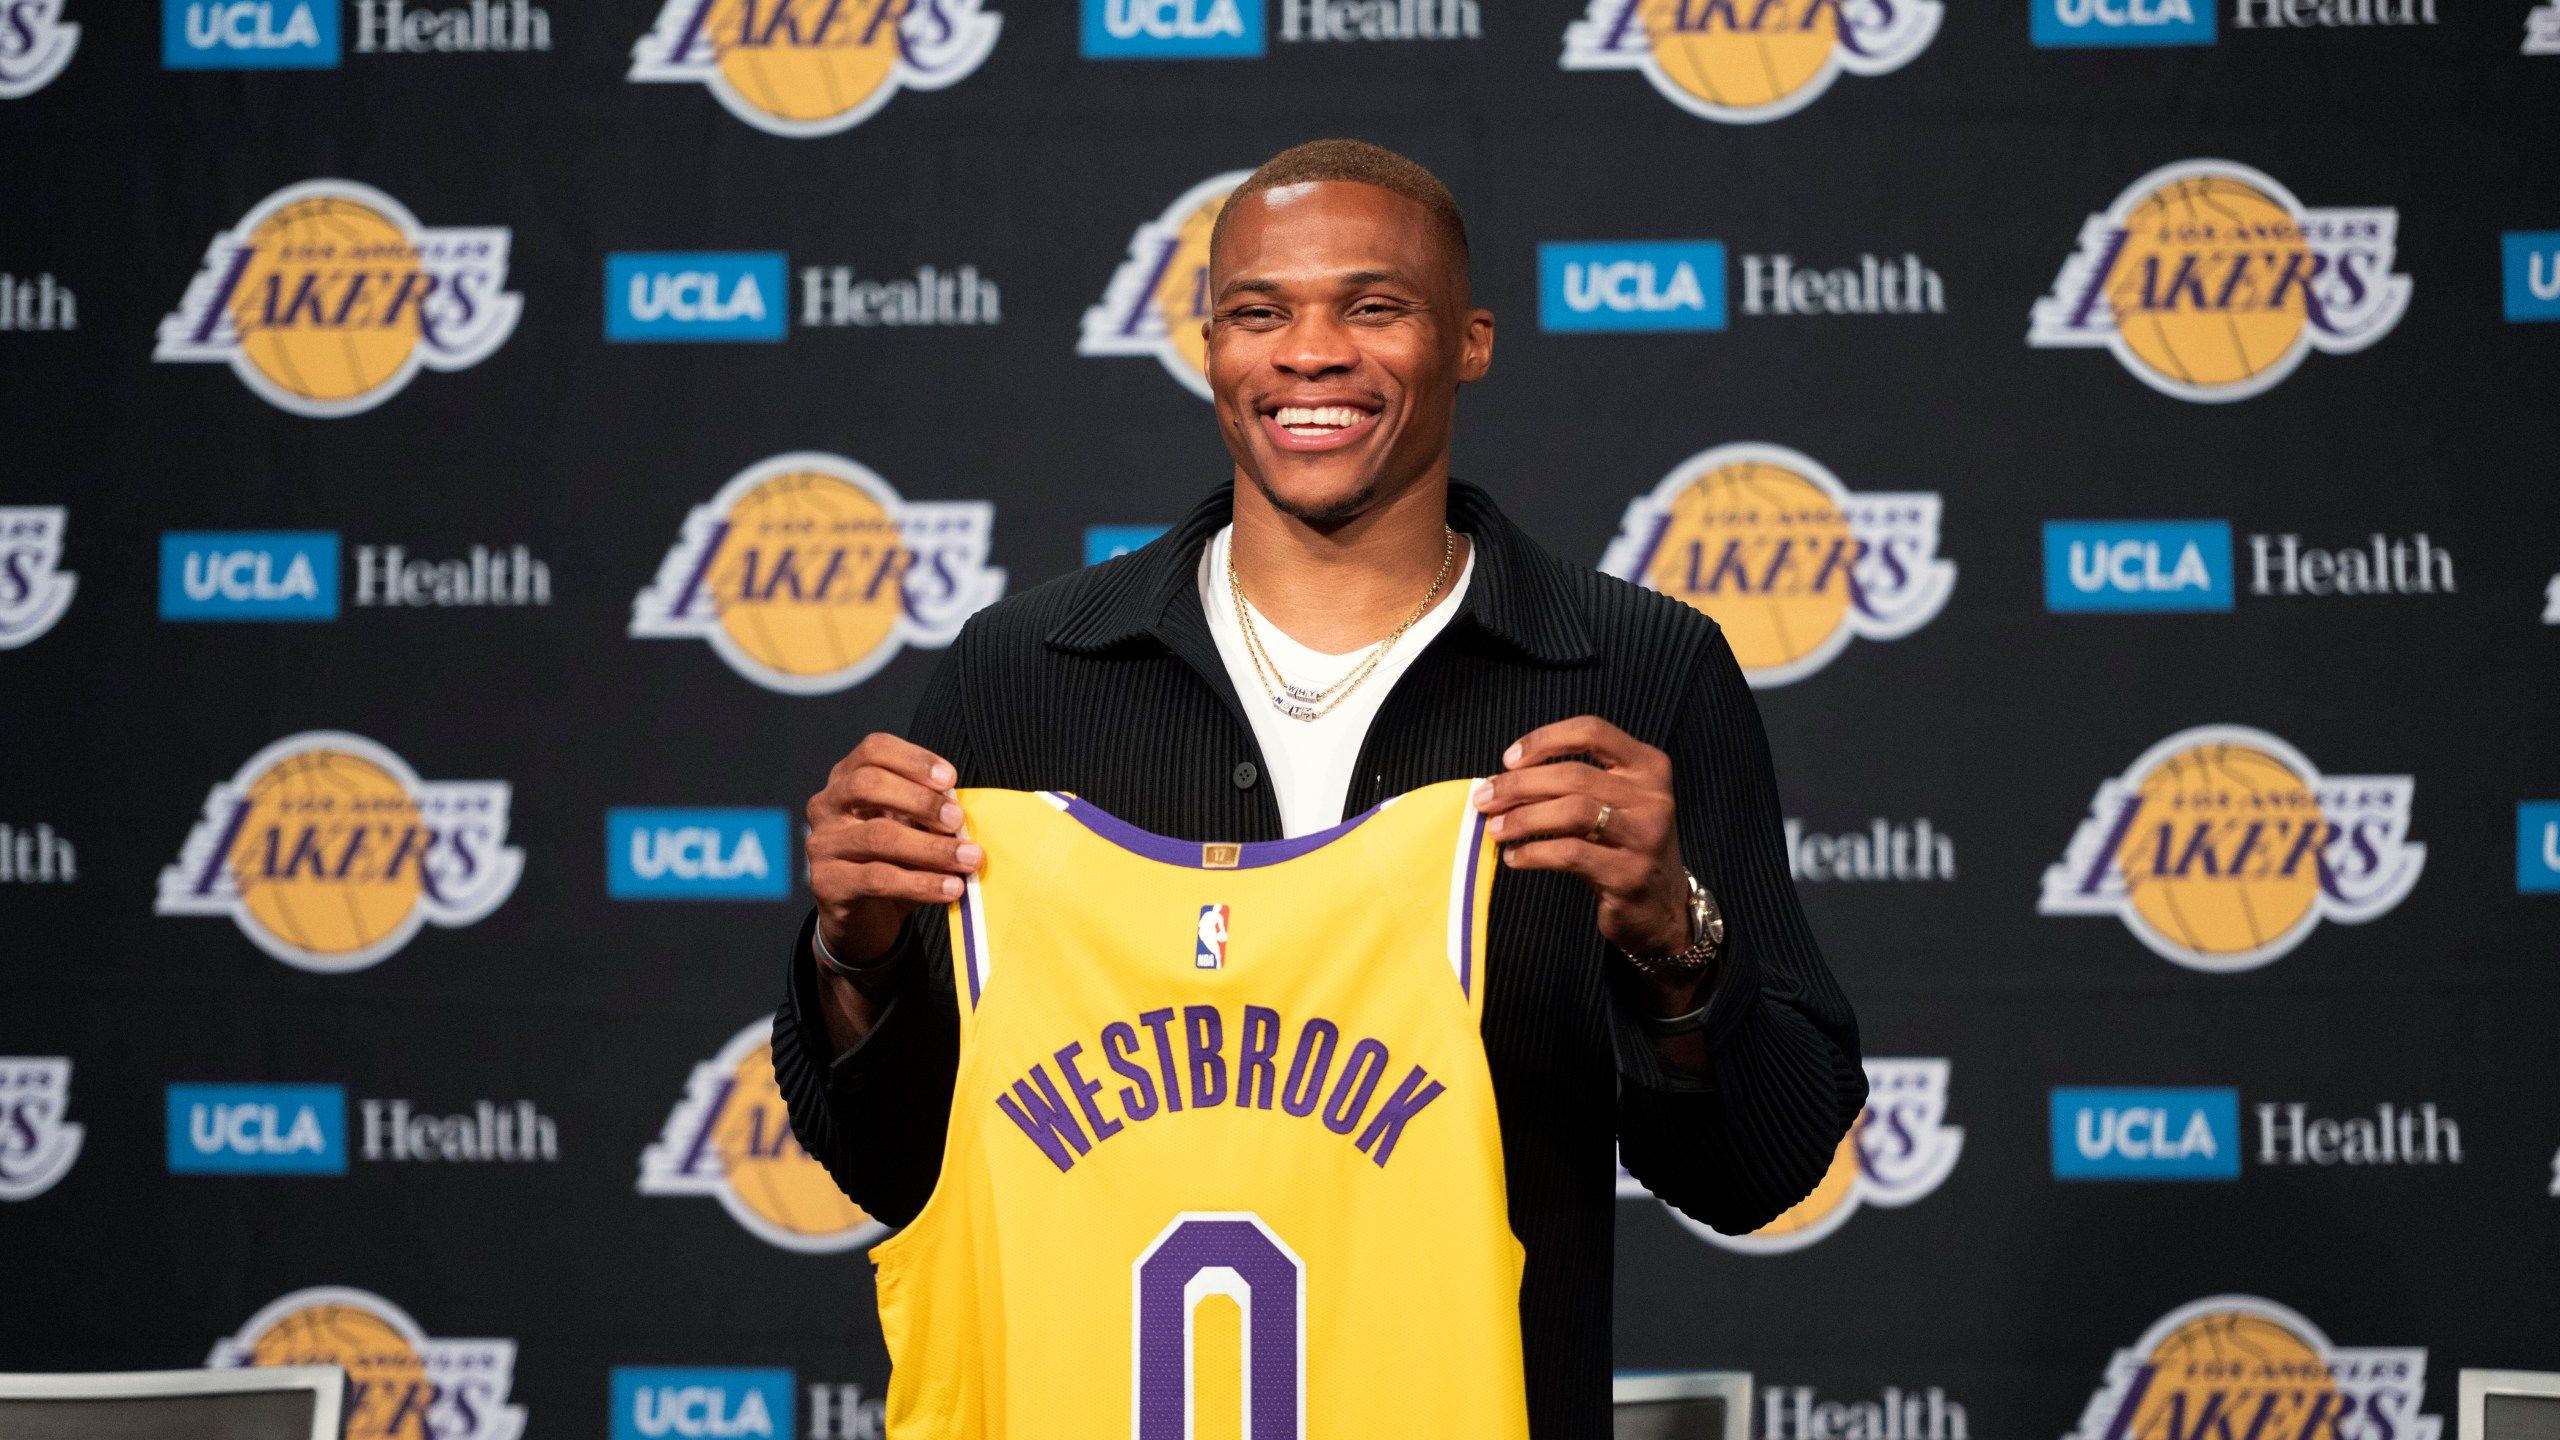 Russell Westbrook eager to help LeBron in Lakers homecoming